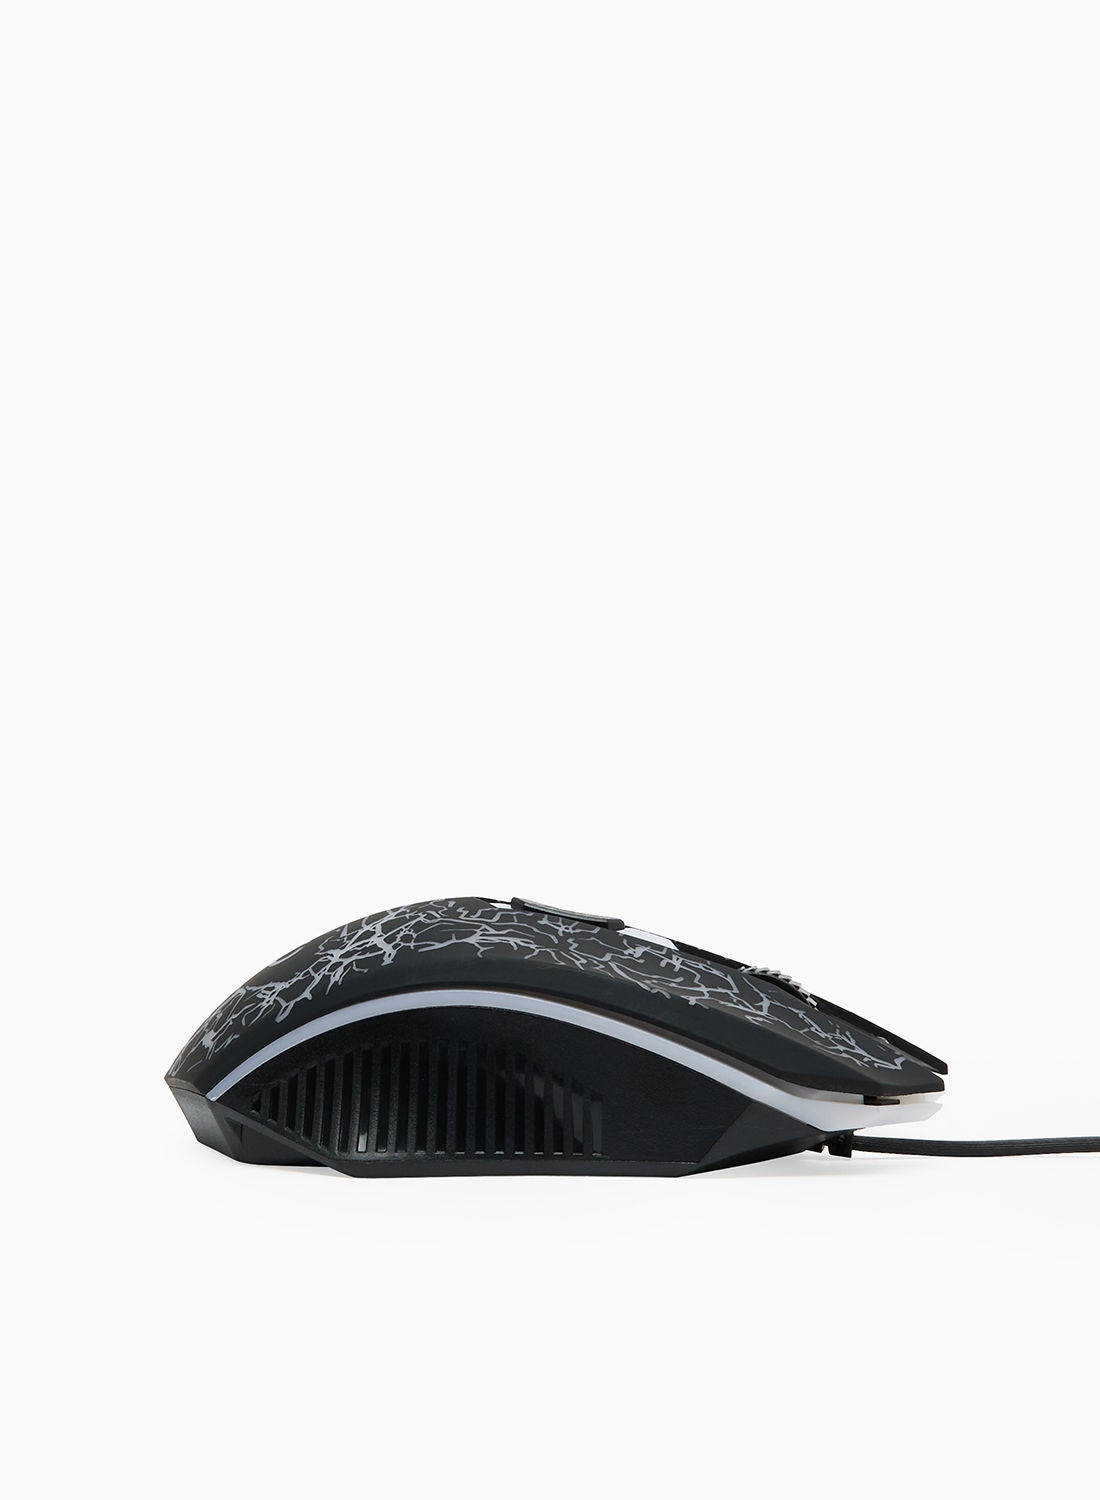 Thunder Optical Gaming Mouse with 4 keys and adjustable DPI -wired 